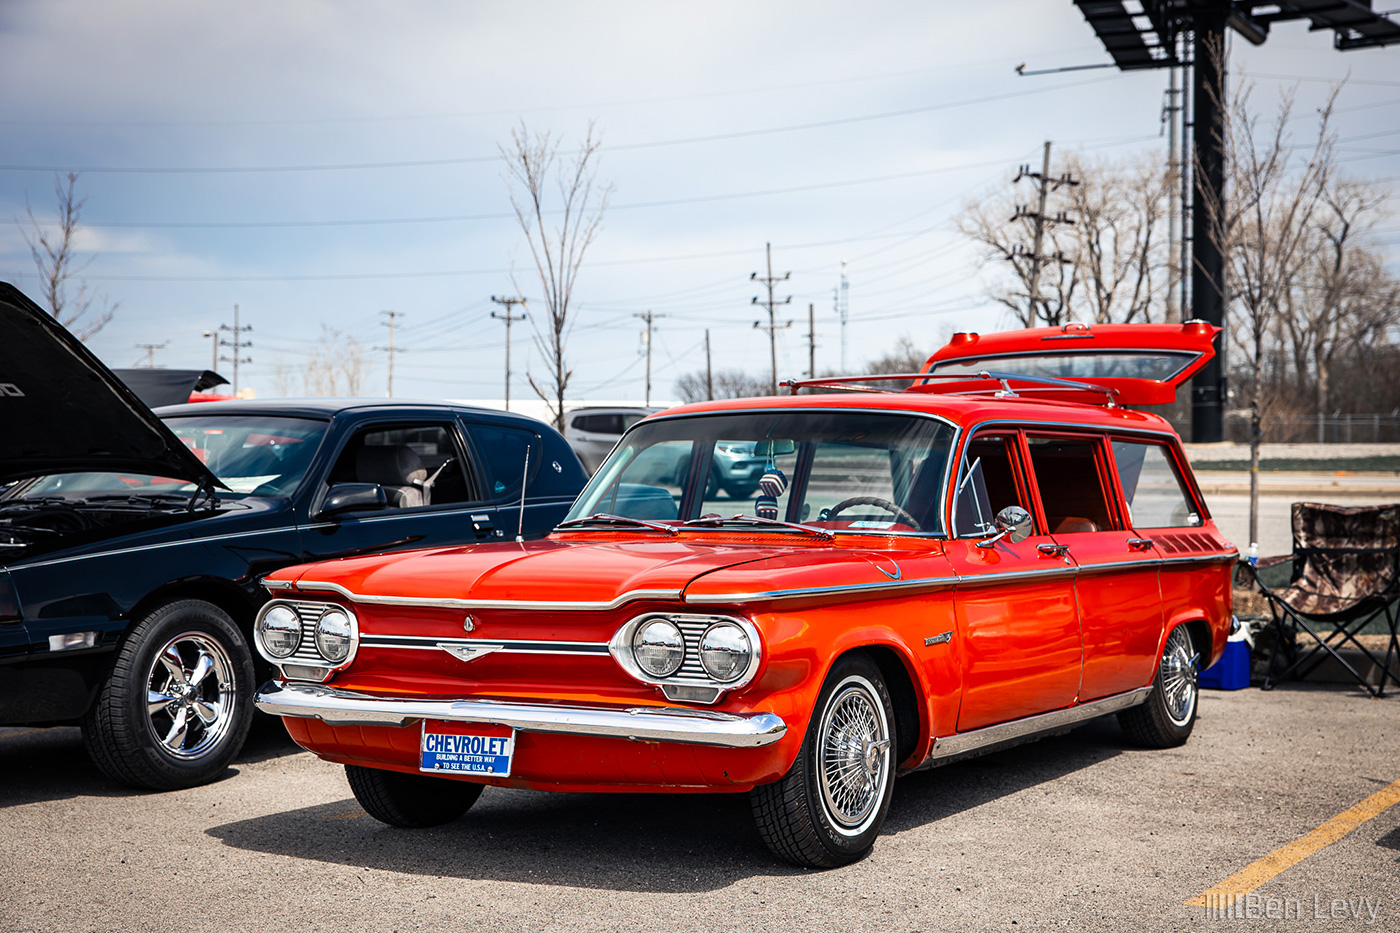 Red Chevrolet Corvair Lakewood in Chicago-Area Car Show